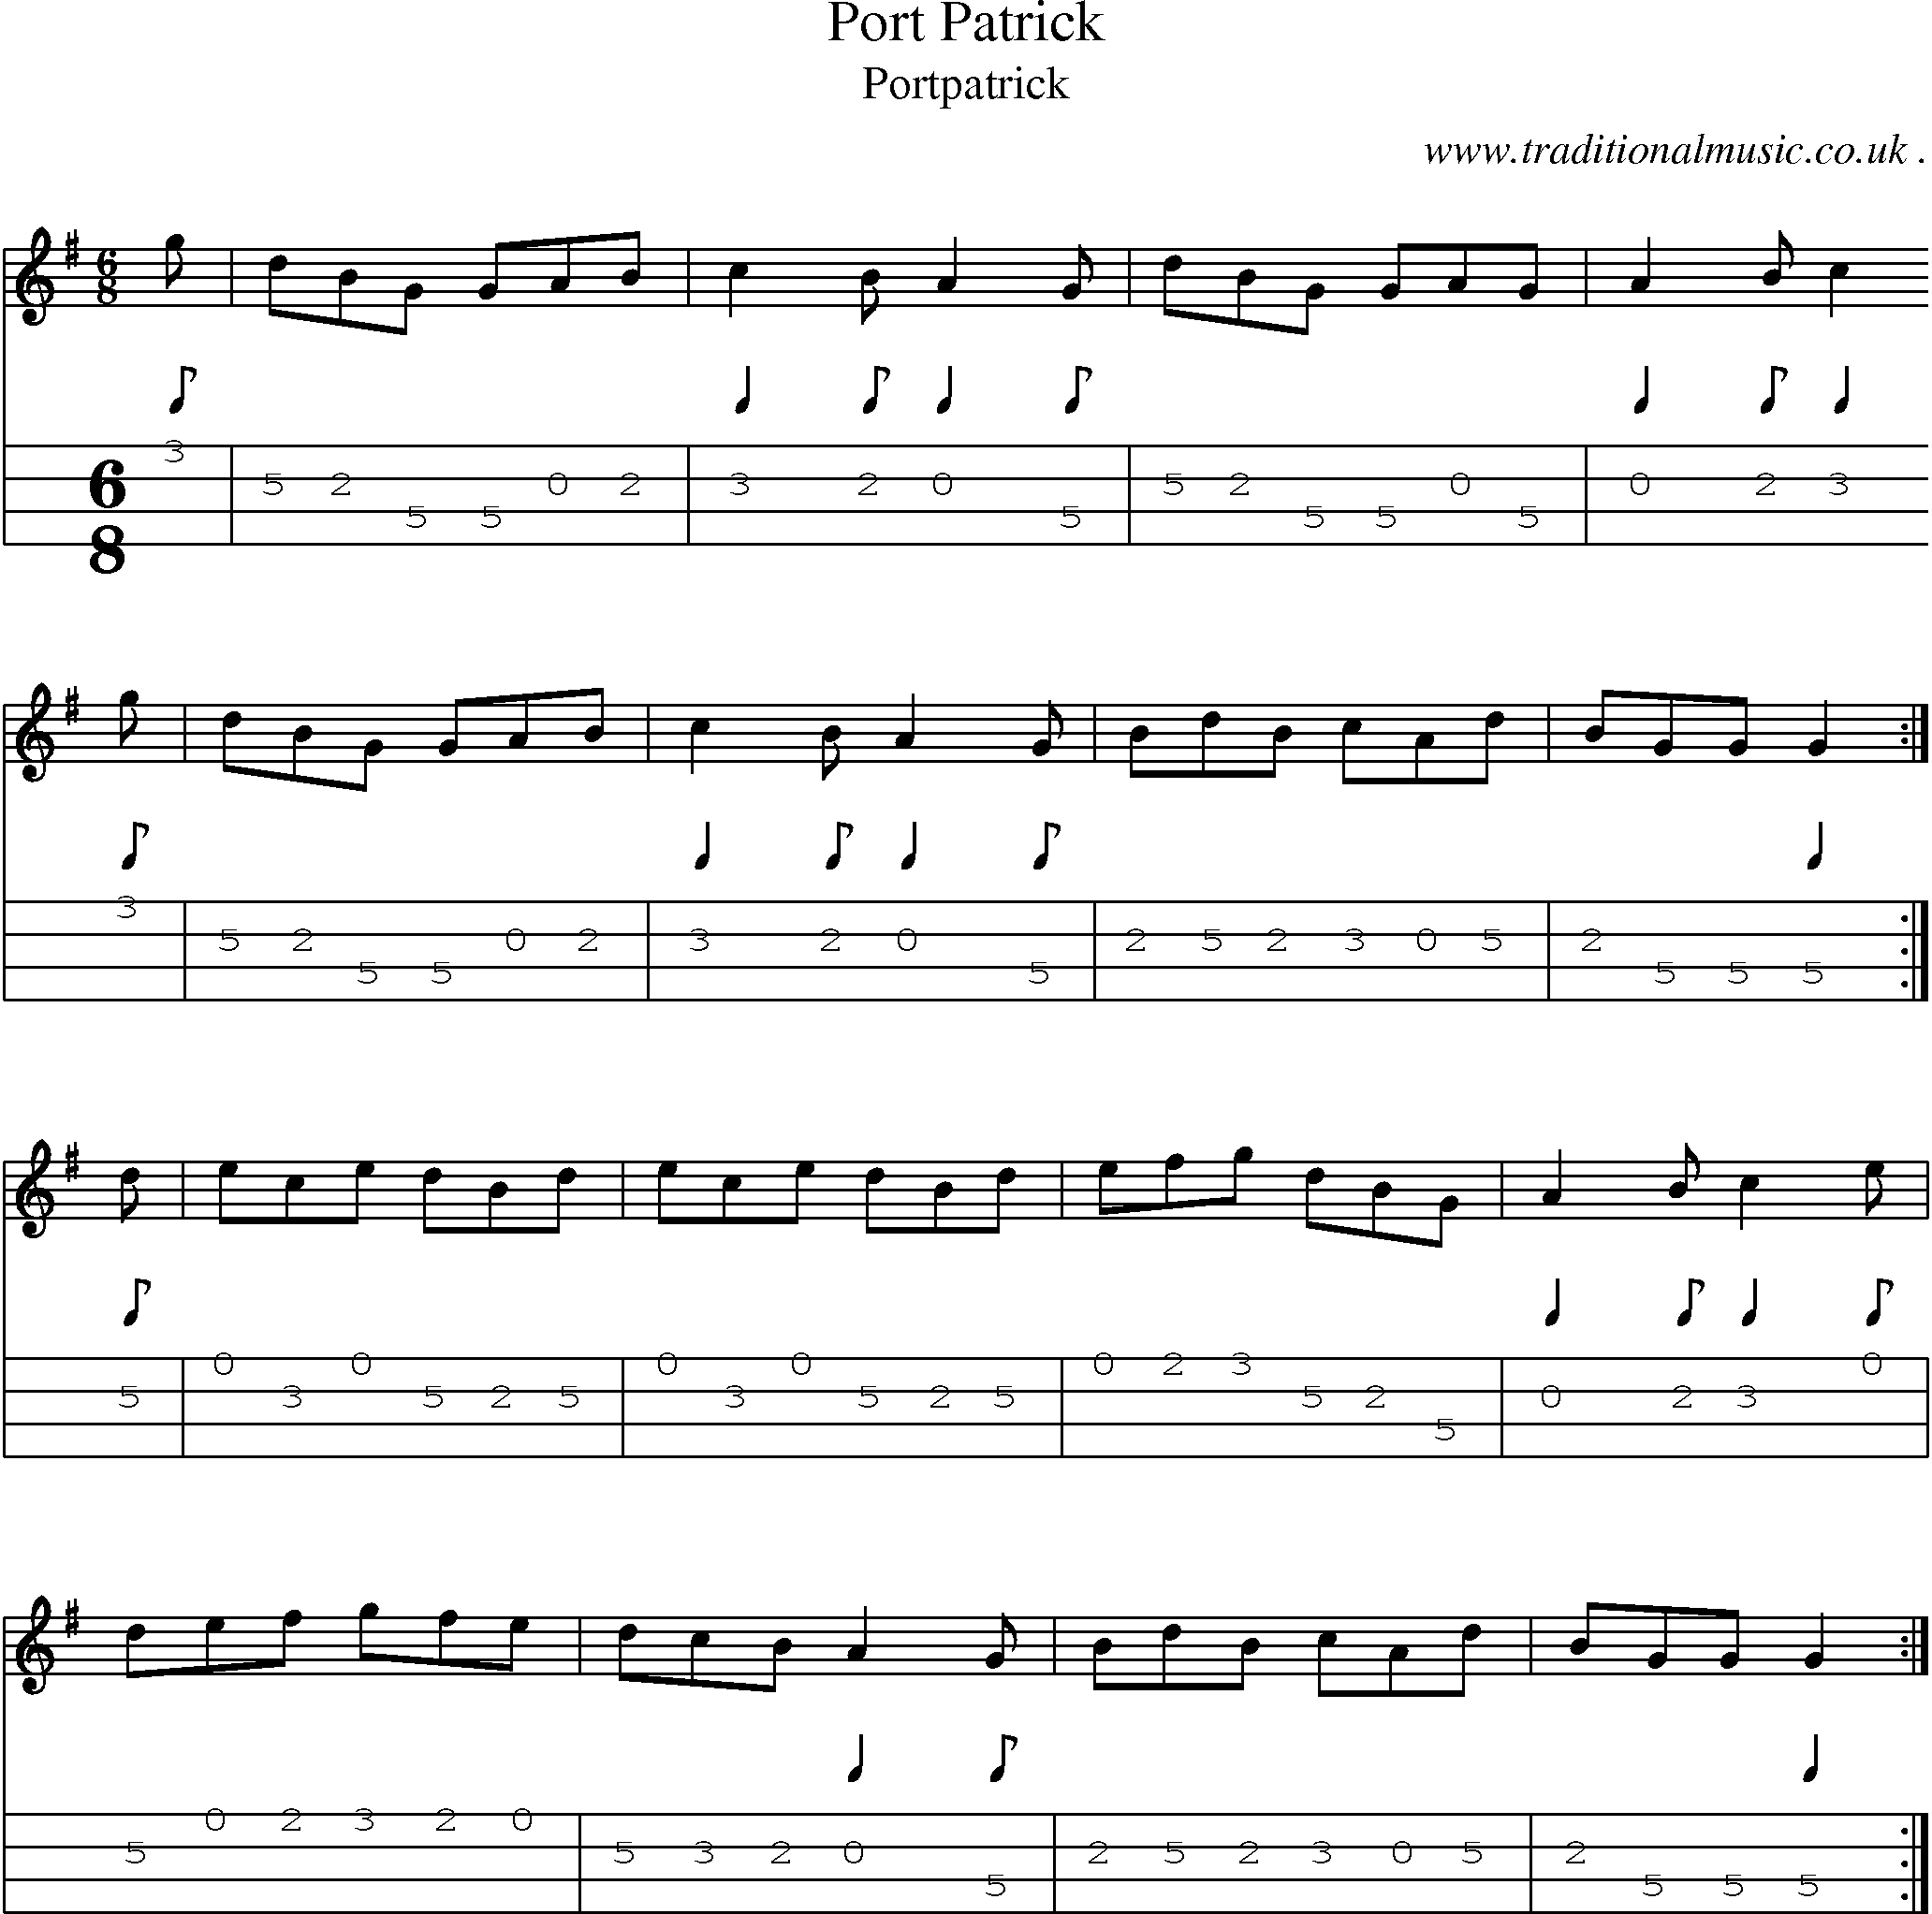 Sheet-music  score, Chords and Mandolin Tabs for Port Patrick